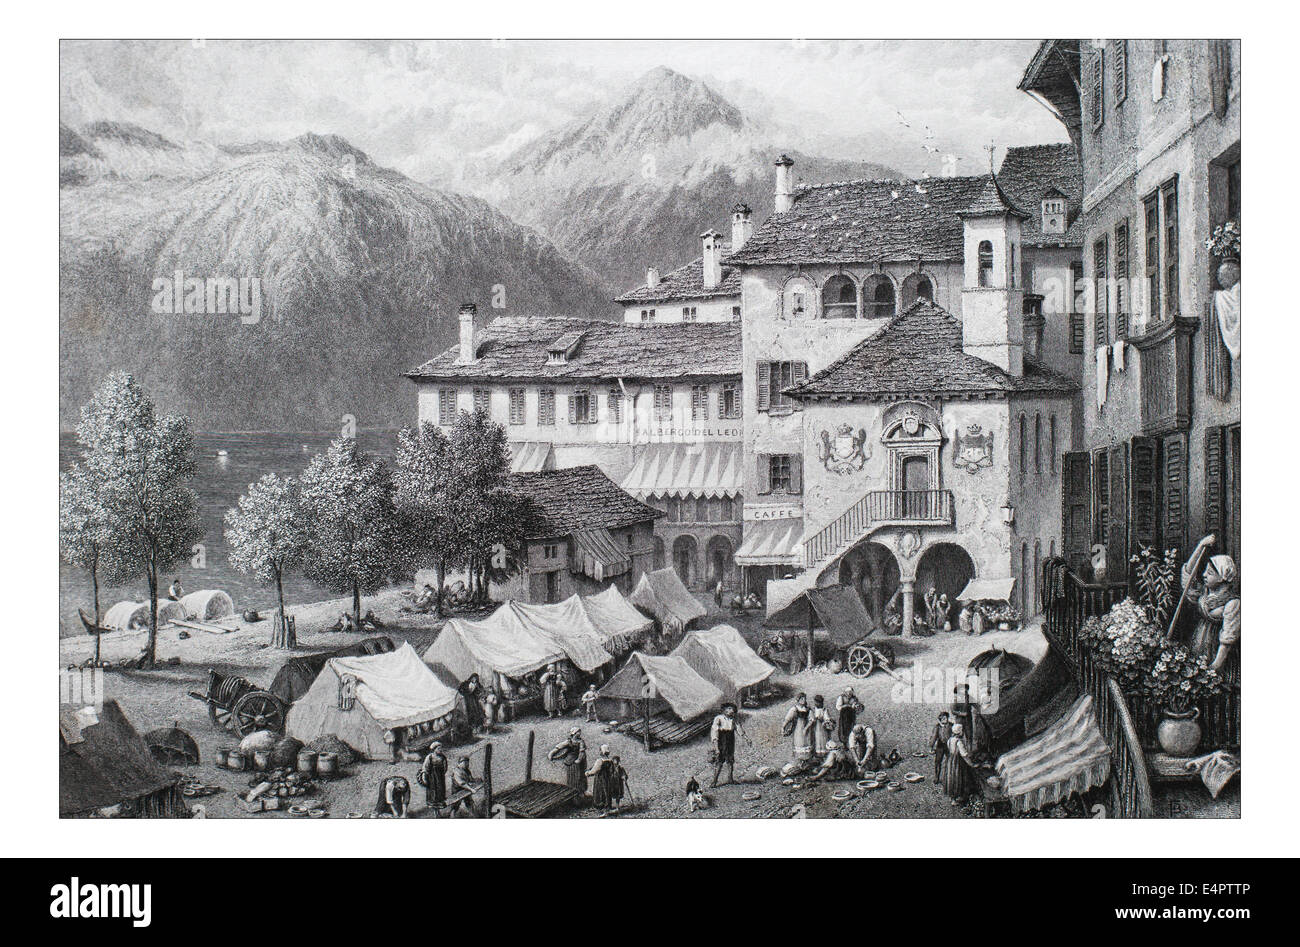 Orta Illustration from 'The British isles - Cassell Petter & Galpin Part 8 Picturesque Europe. Picturesque Europe was an illustrated set of Magazines published by Cassell, Petter, Galpin & Co. of London, Paris and New York in 1877. The publications depicted tourist haunts in Europe, with text descriptions and steel and wood engravings by eminent artists of the time, such as Harry Fenn, William H J Boot, Thomas C. L. Rowbotham, Henry T. Green , Myles B. Foster, John Mogford , David H. McKewan, William L. Leitch, Edmund M. Wimperis and Joseph B. Smith. Stock Photo